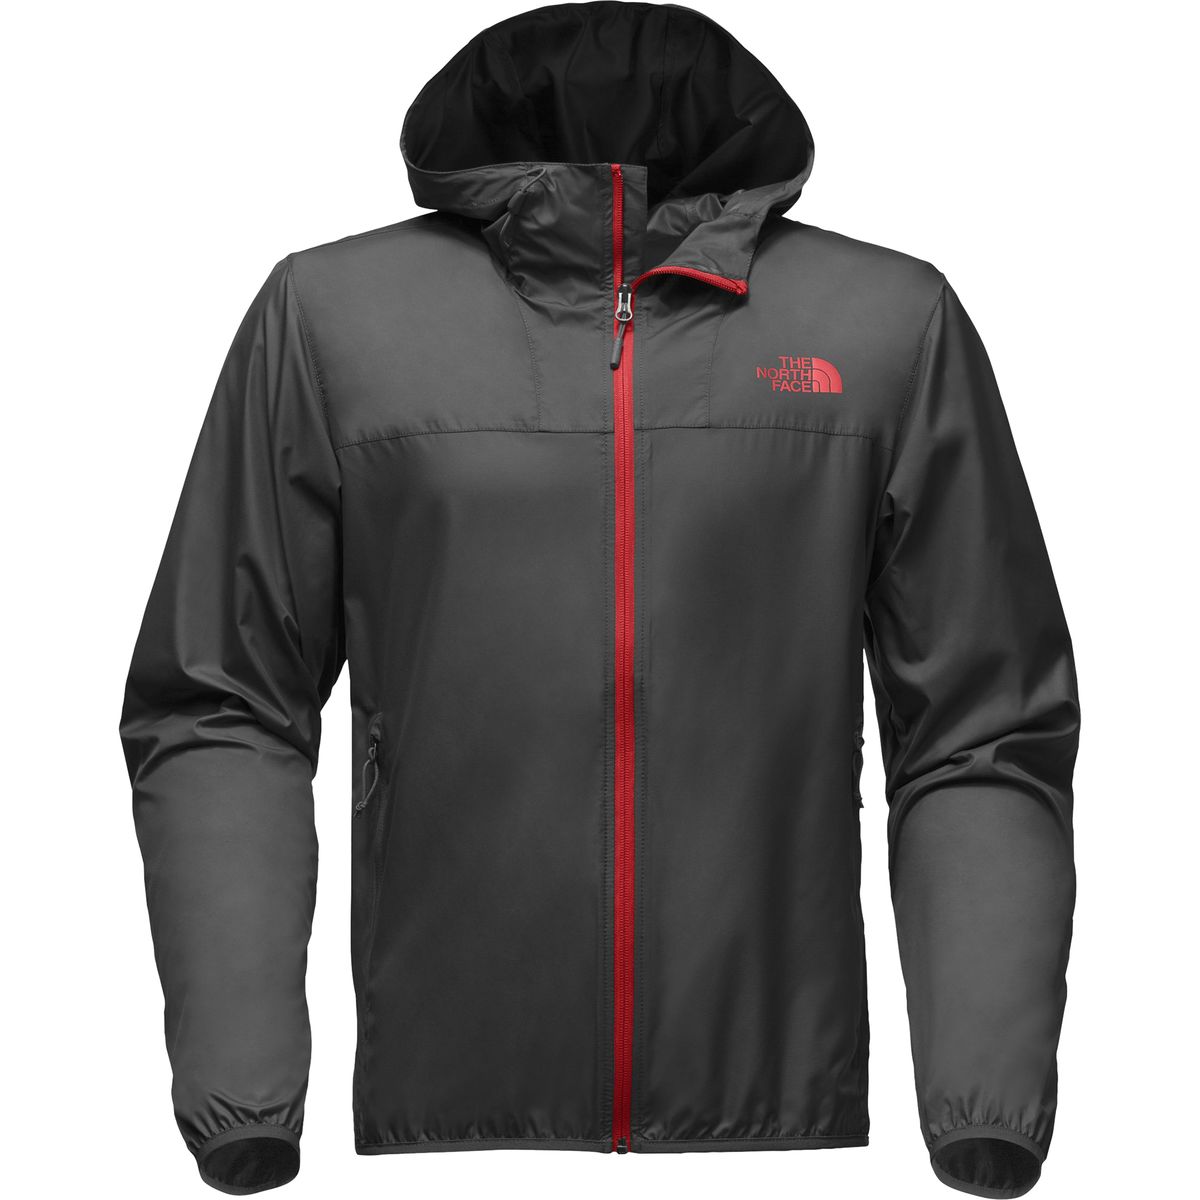 Ijver gerucht Medicinaal The North Face Cyclone 2 Hooded Jacket - Men's - Clothing